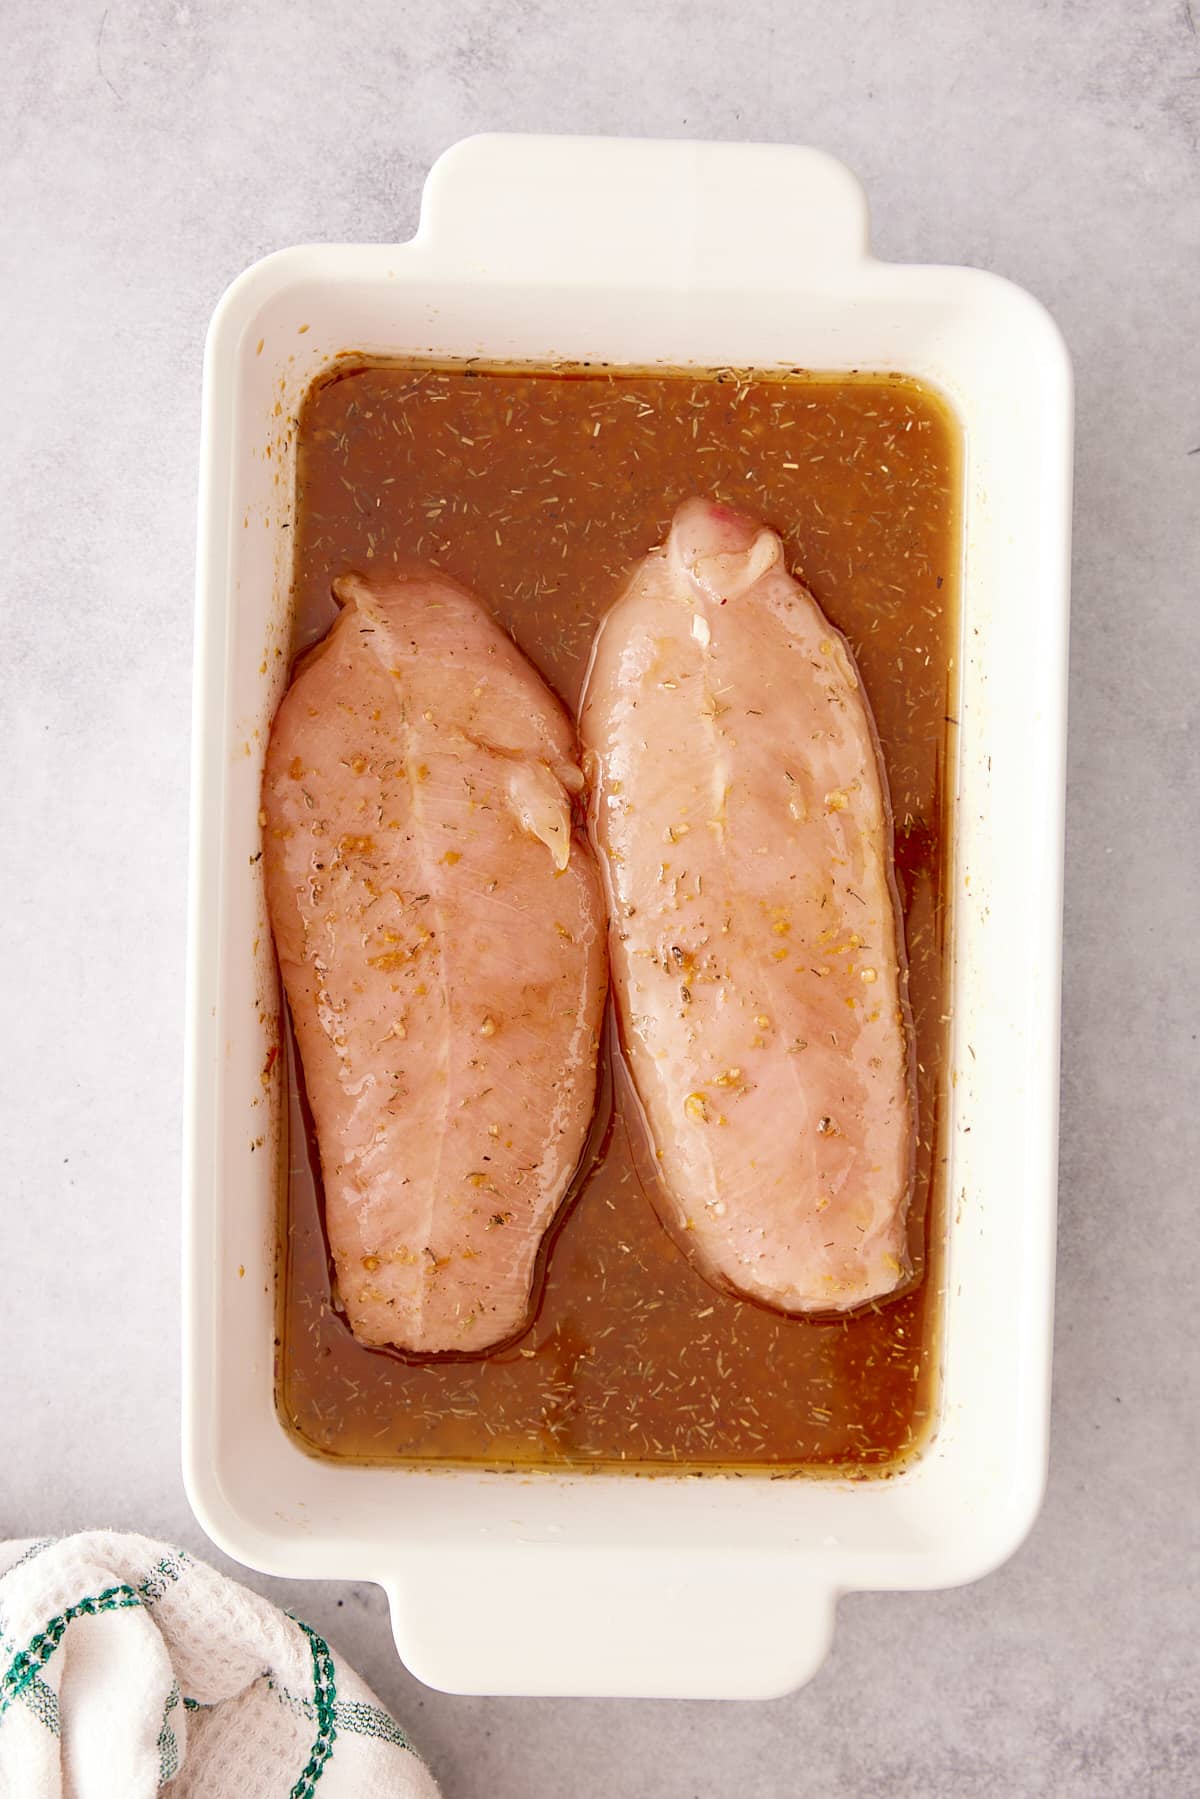 White dish containing two turkey tenderloins covered in marinade